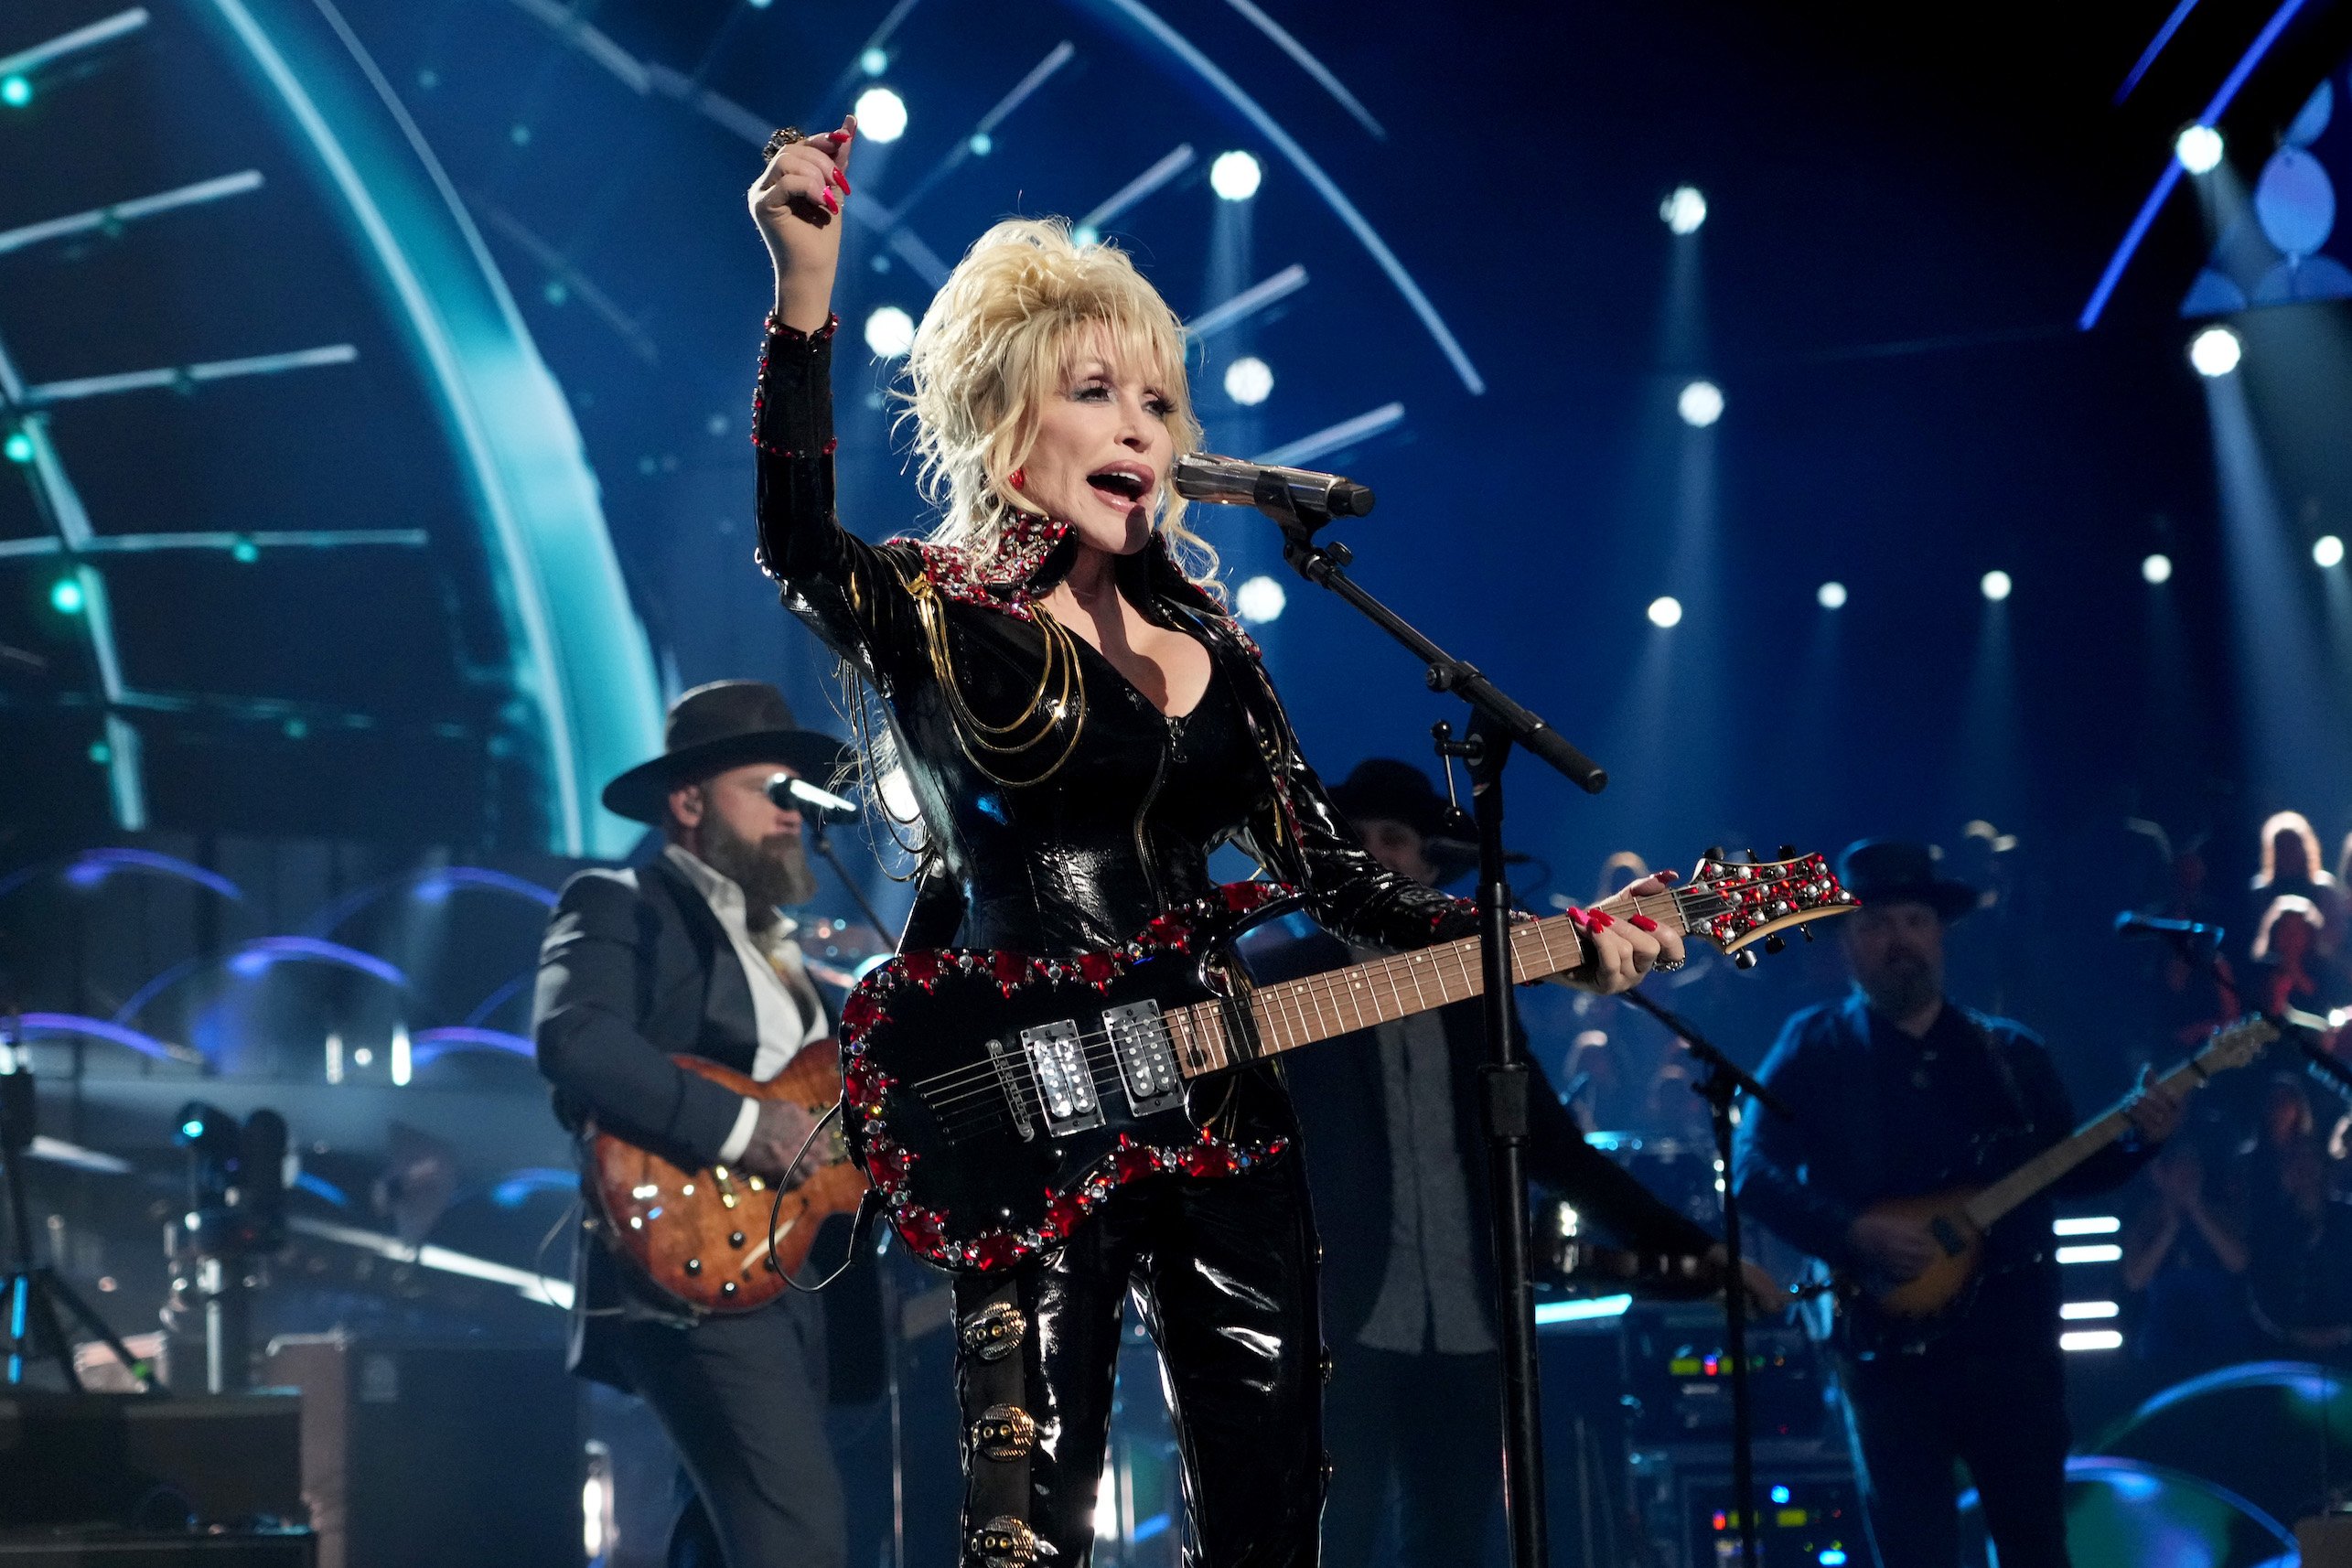 Dolly Parton performs at the 37th Annual Rock & Roll Hall of Fame Induction Ceremony in Los Angeles, California